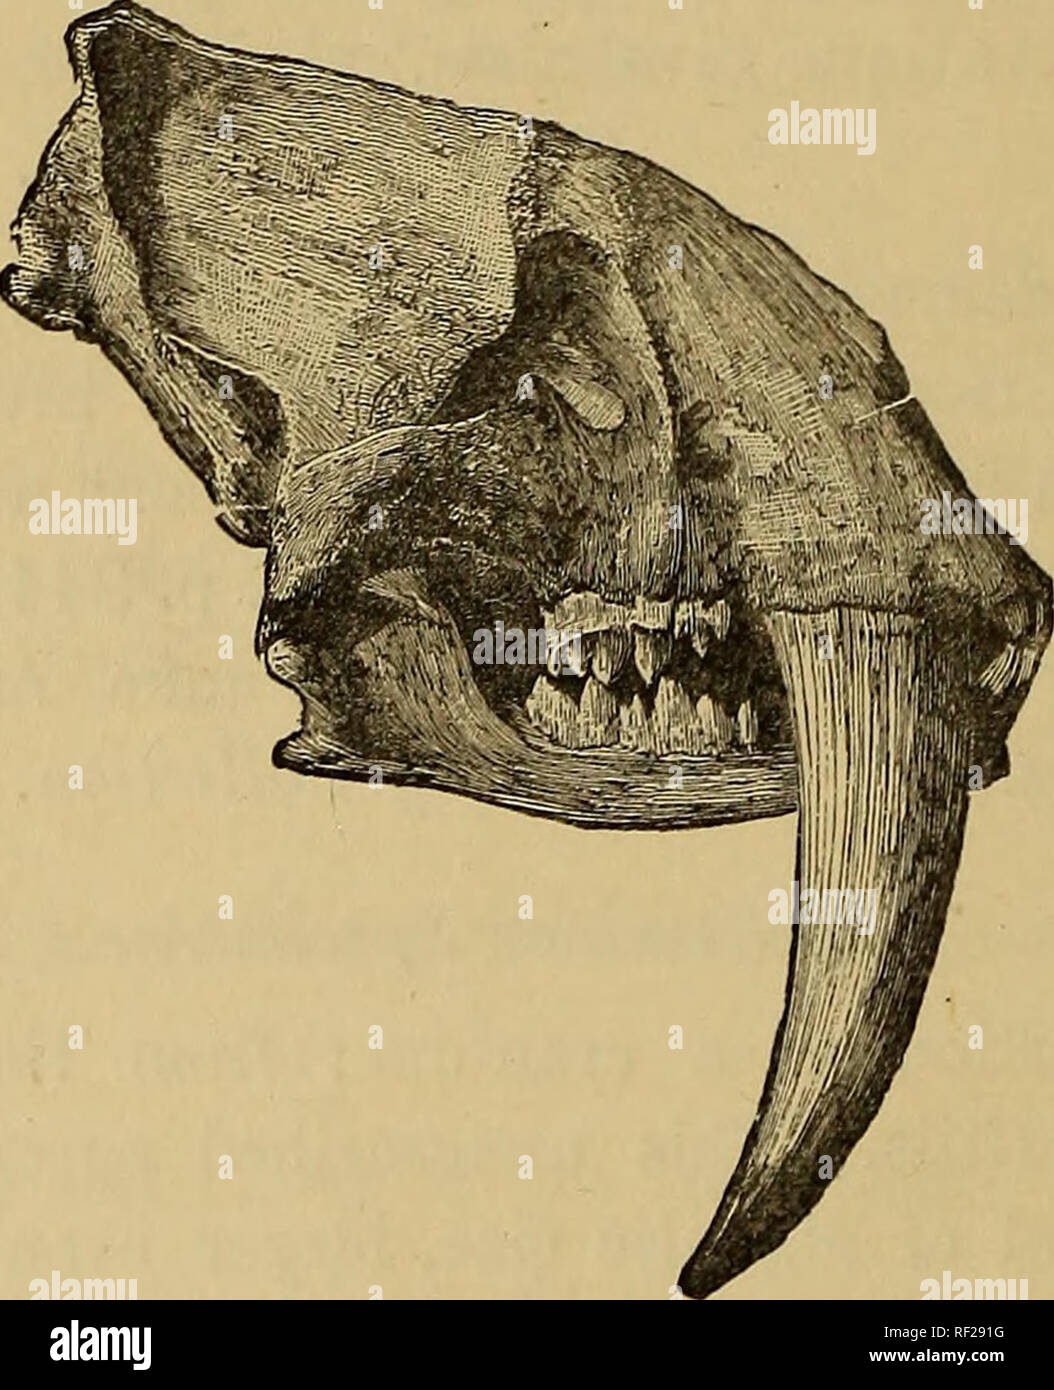 . Catalogue of the fossil Mammalia in the British museum, (Natural History). Mammals, Fossil. 48 CARSTVORA. Smilodon neogceus, Cope. Smilodon populator, Lund1. Hah. S. America. 21000. The cranium and mandible, wanting the maxillae and the left premaxilla; from the Pleistocene of Buenos Ayres. The upper portion of the left canine remains; there are only two cheek-teeth on each side of the mandible. Purchased, 1846. M. 1572. Cast of the cranium and mandible; from a cavern in Minas Geraes, Brazil. The original of this specimen (from which the woodcut fig. 6 is modified) is in the Paris Pig. 6.. M Stock Photo